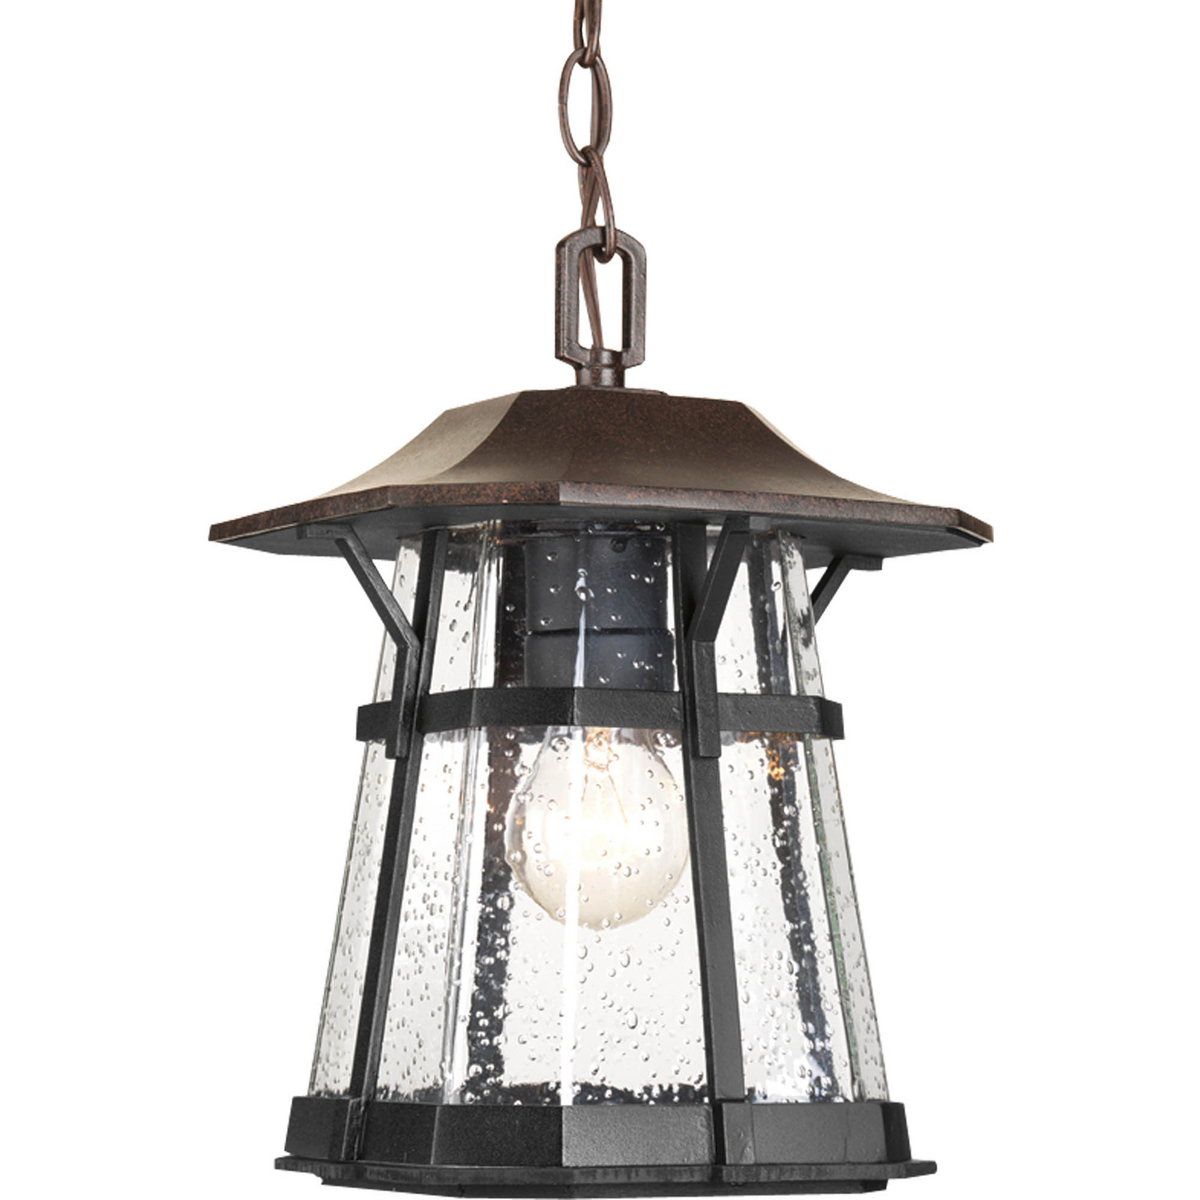 One-light hanging lantern from the Derby collection boasts a combination of Espresso and textured black powder coated finishes. The seeded glass diffuser is encased in the cast aluminum black from with the Espresso finish on the roof.